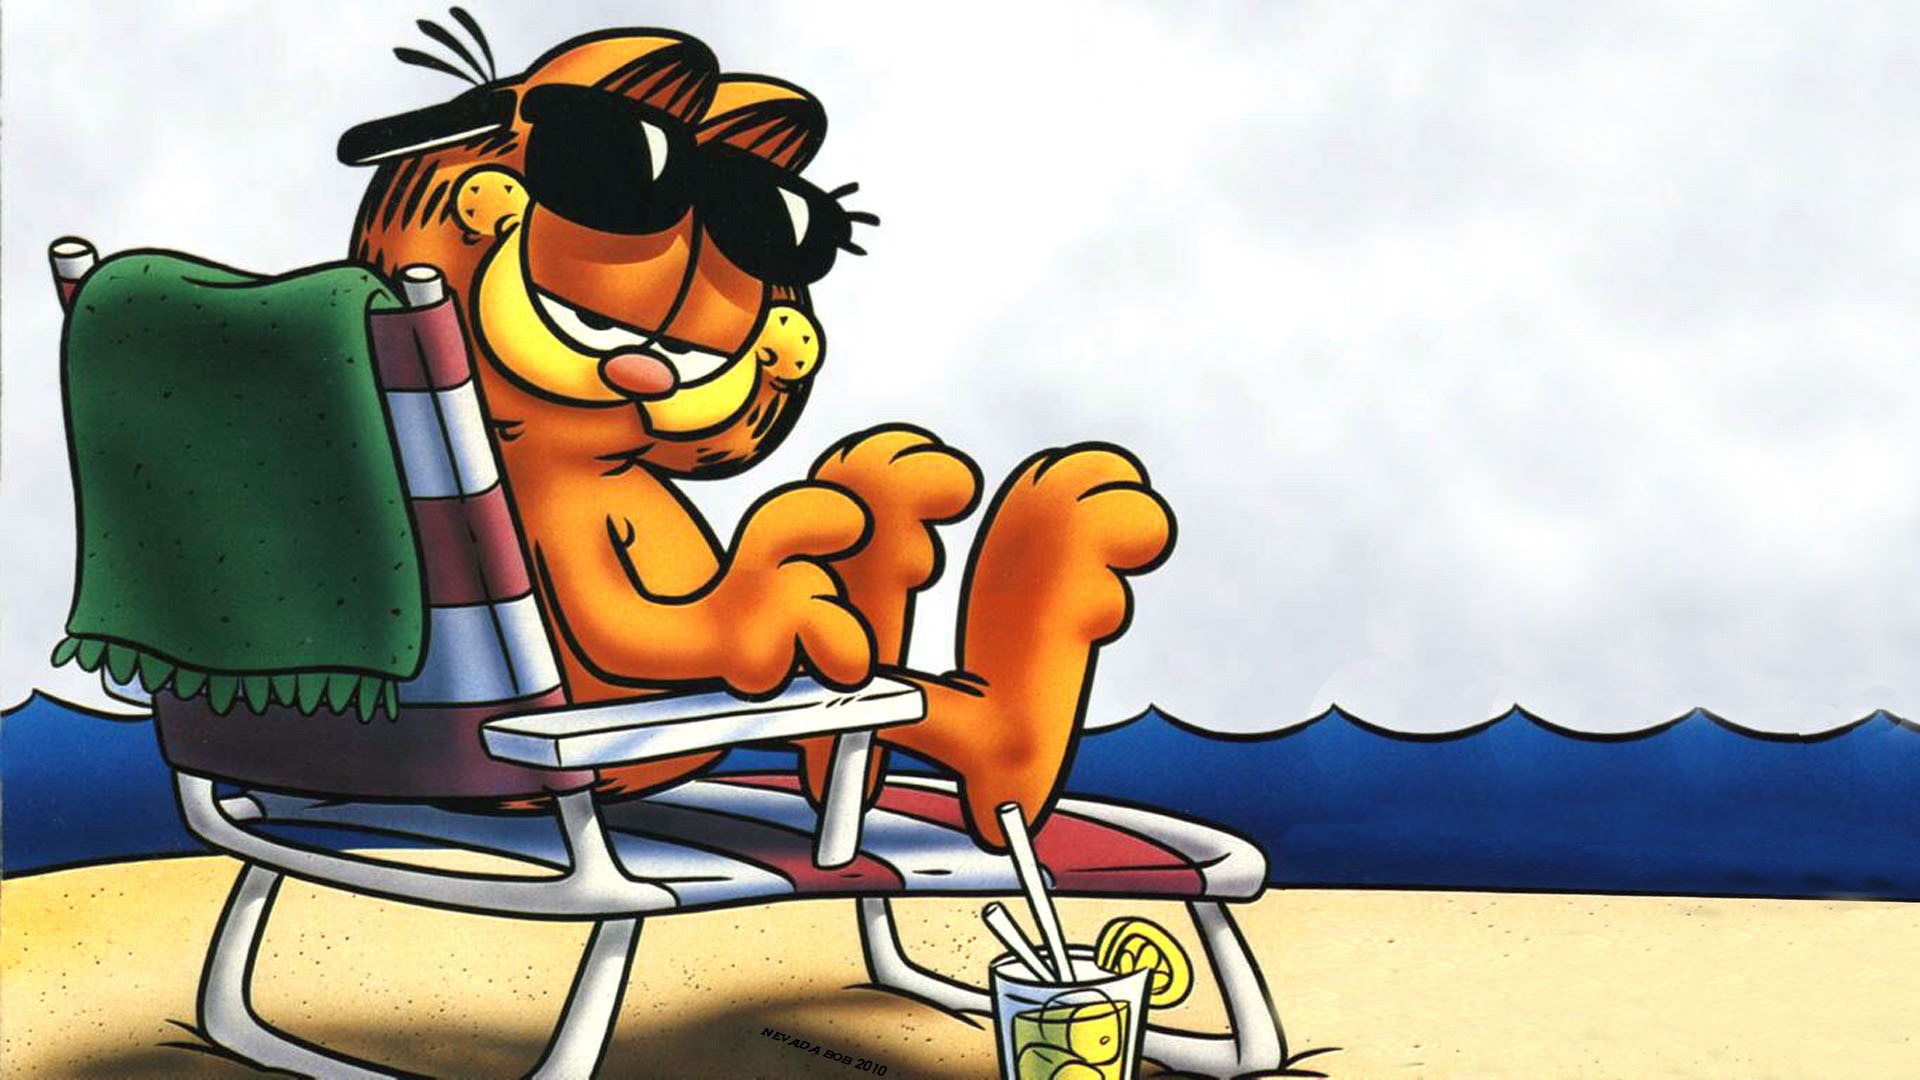 Garfield Animated for 1920 x 1080 HDTV 1080p resolution